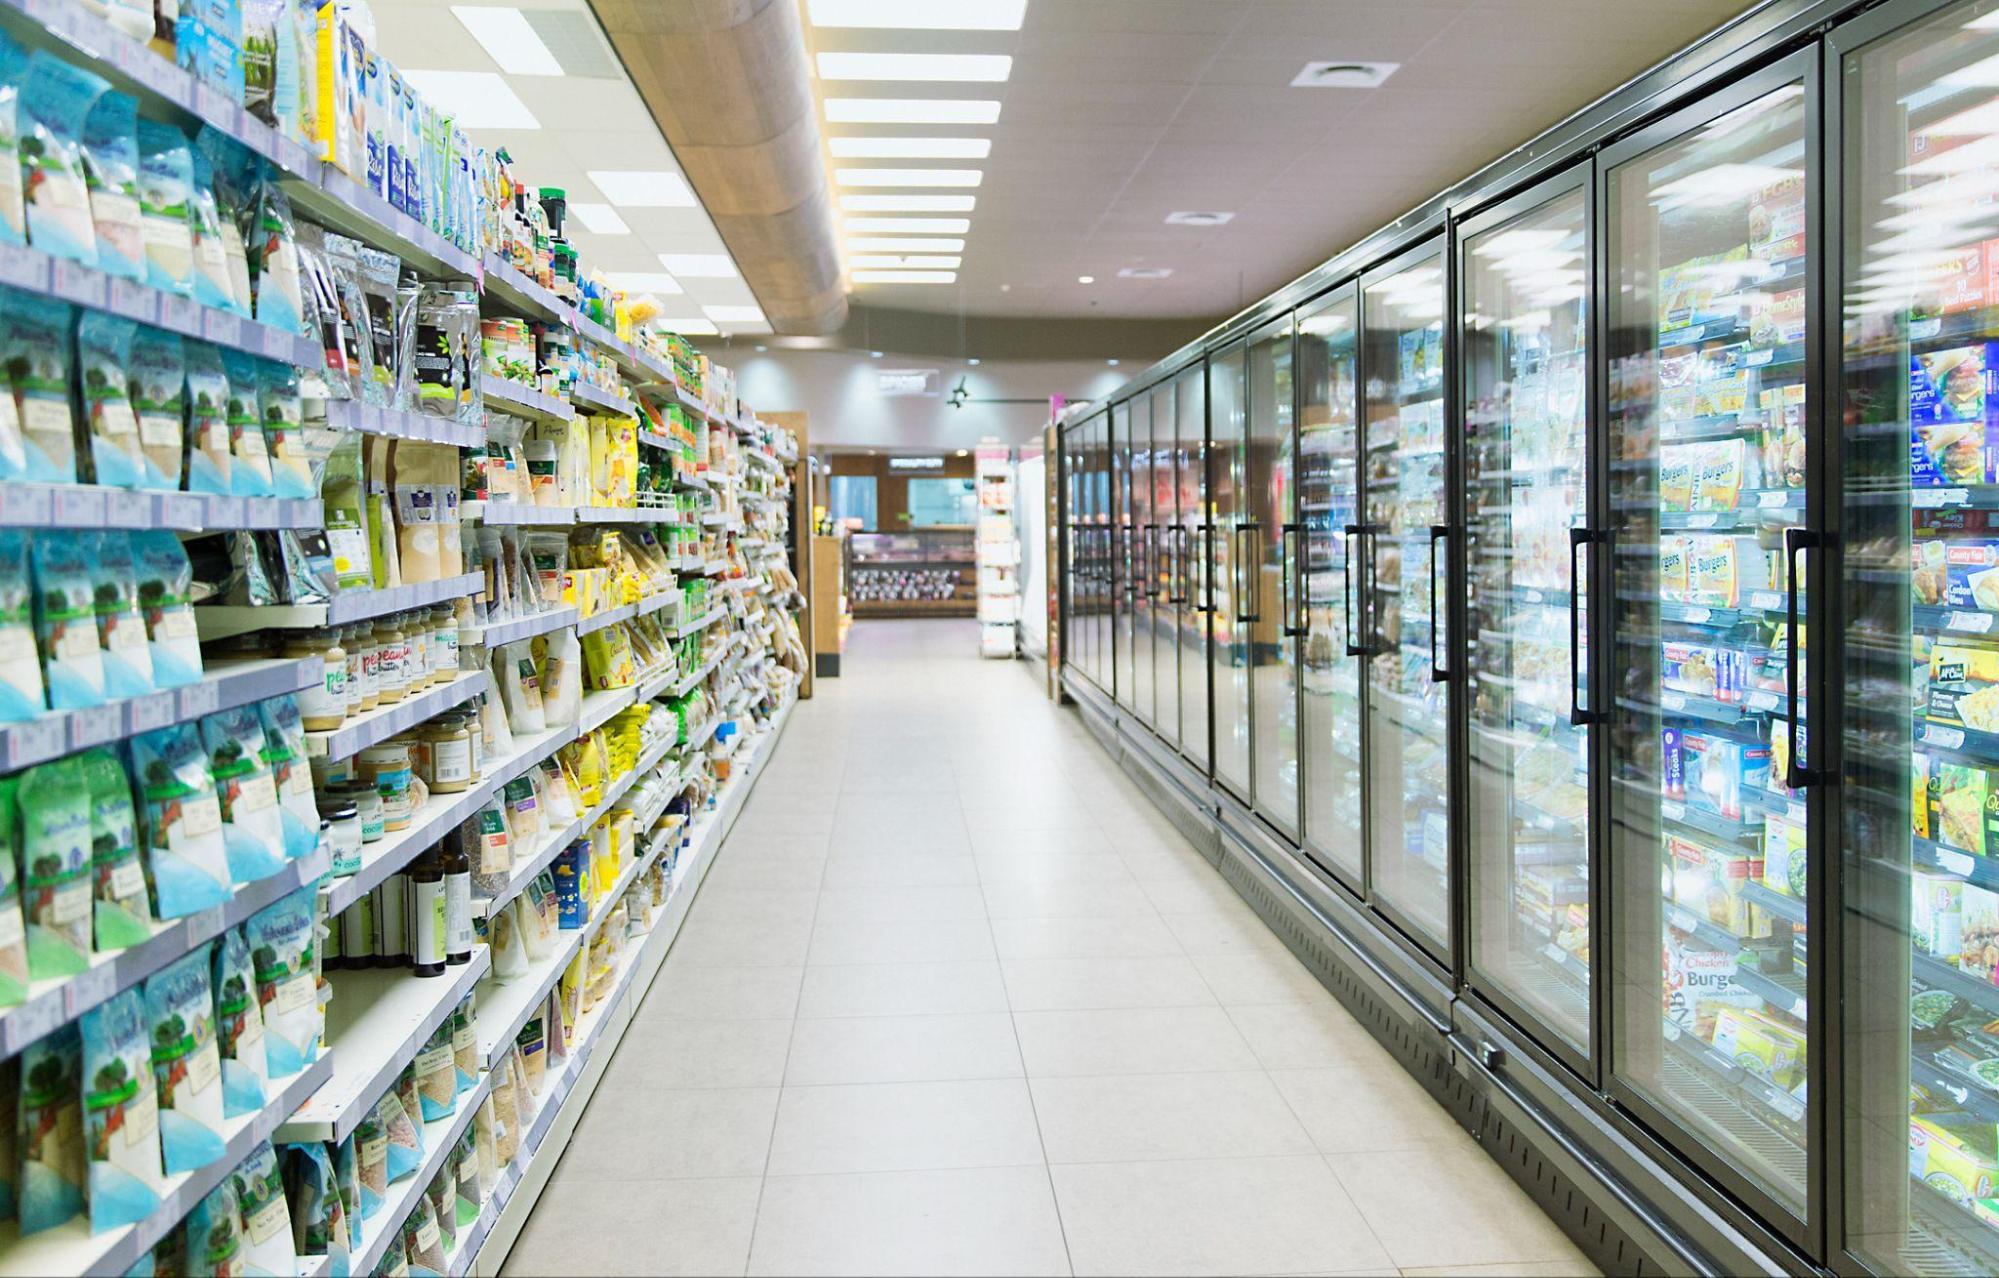 A grocery store aisle showing a frozen food section on the right and shelves of products on the left.